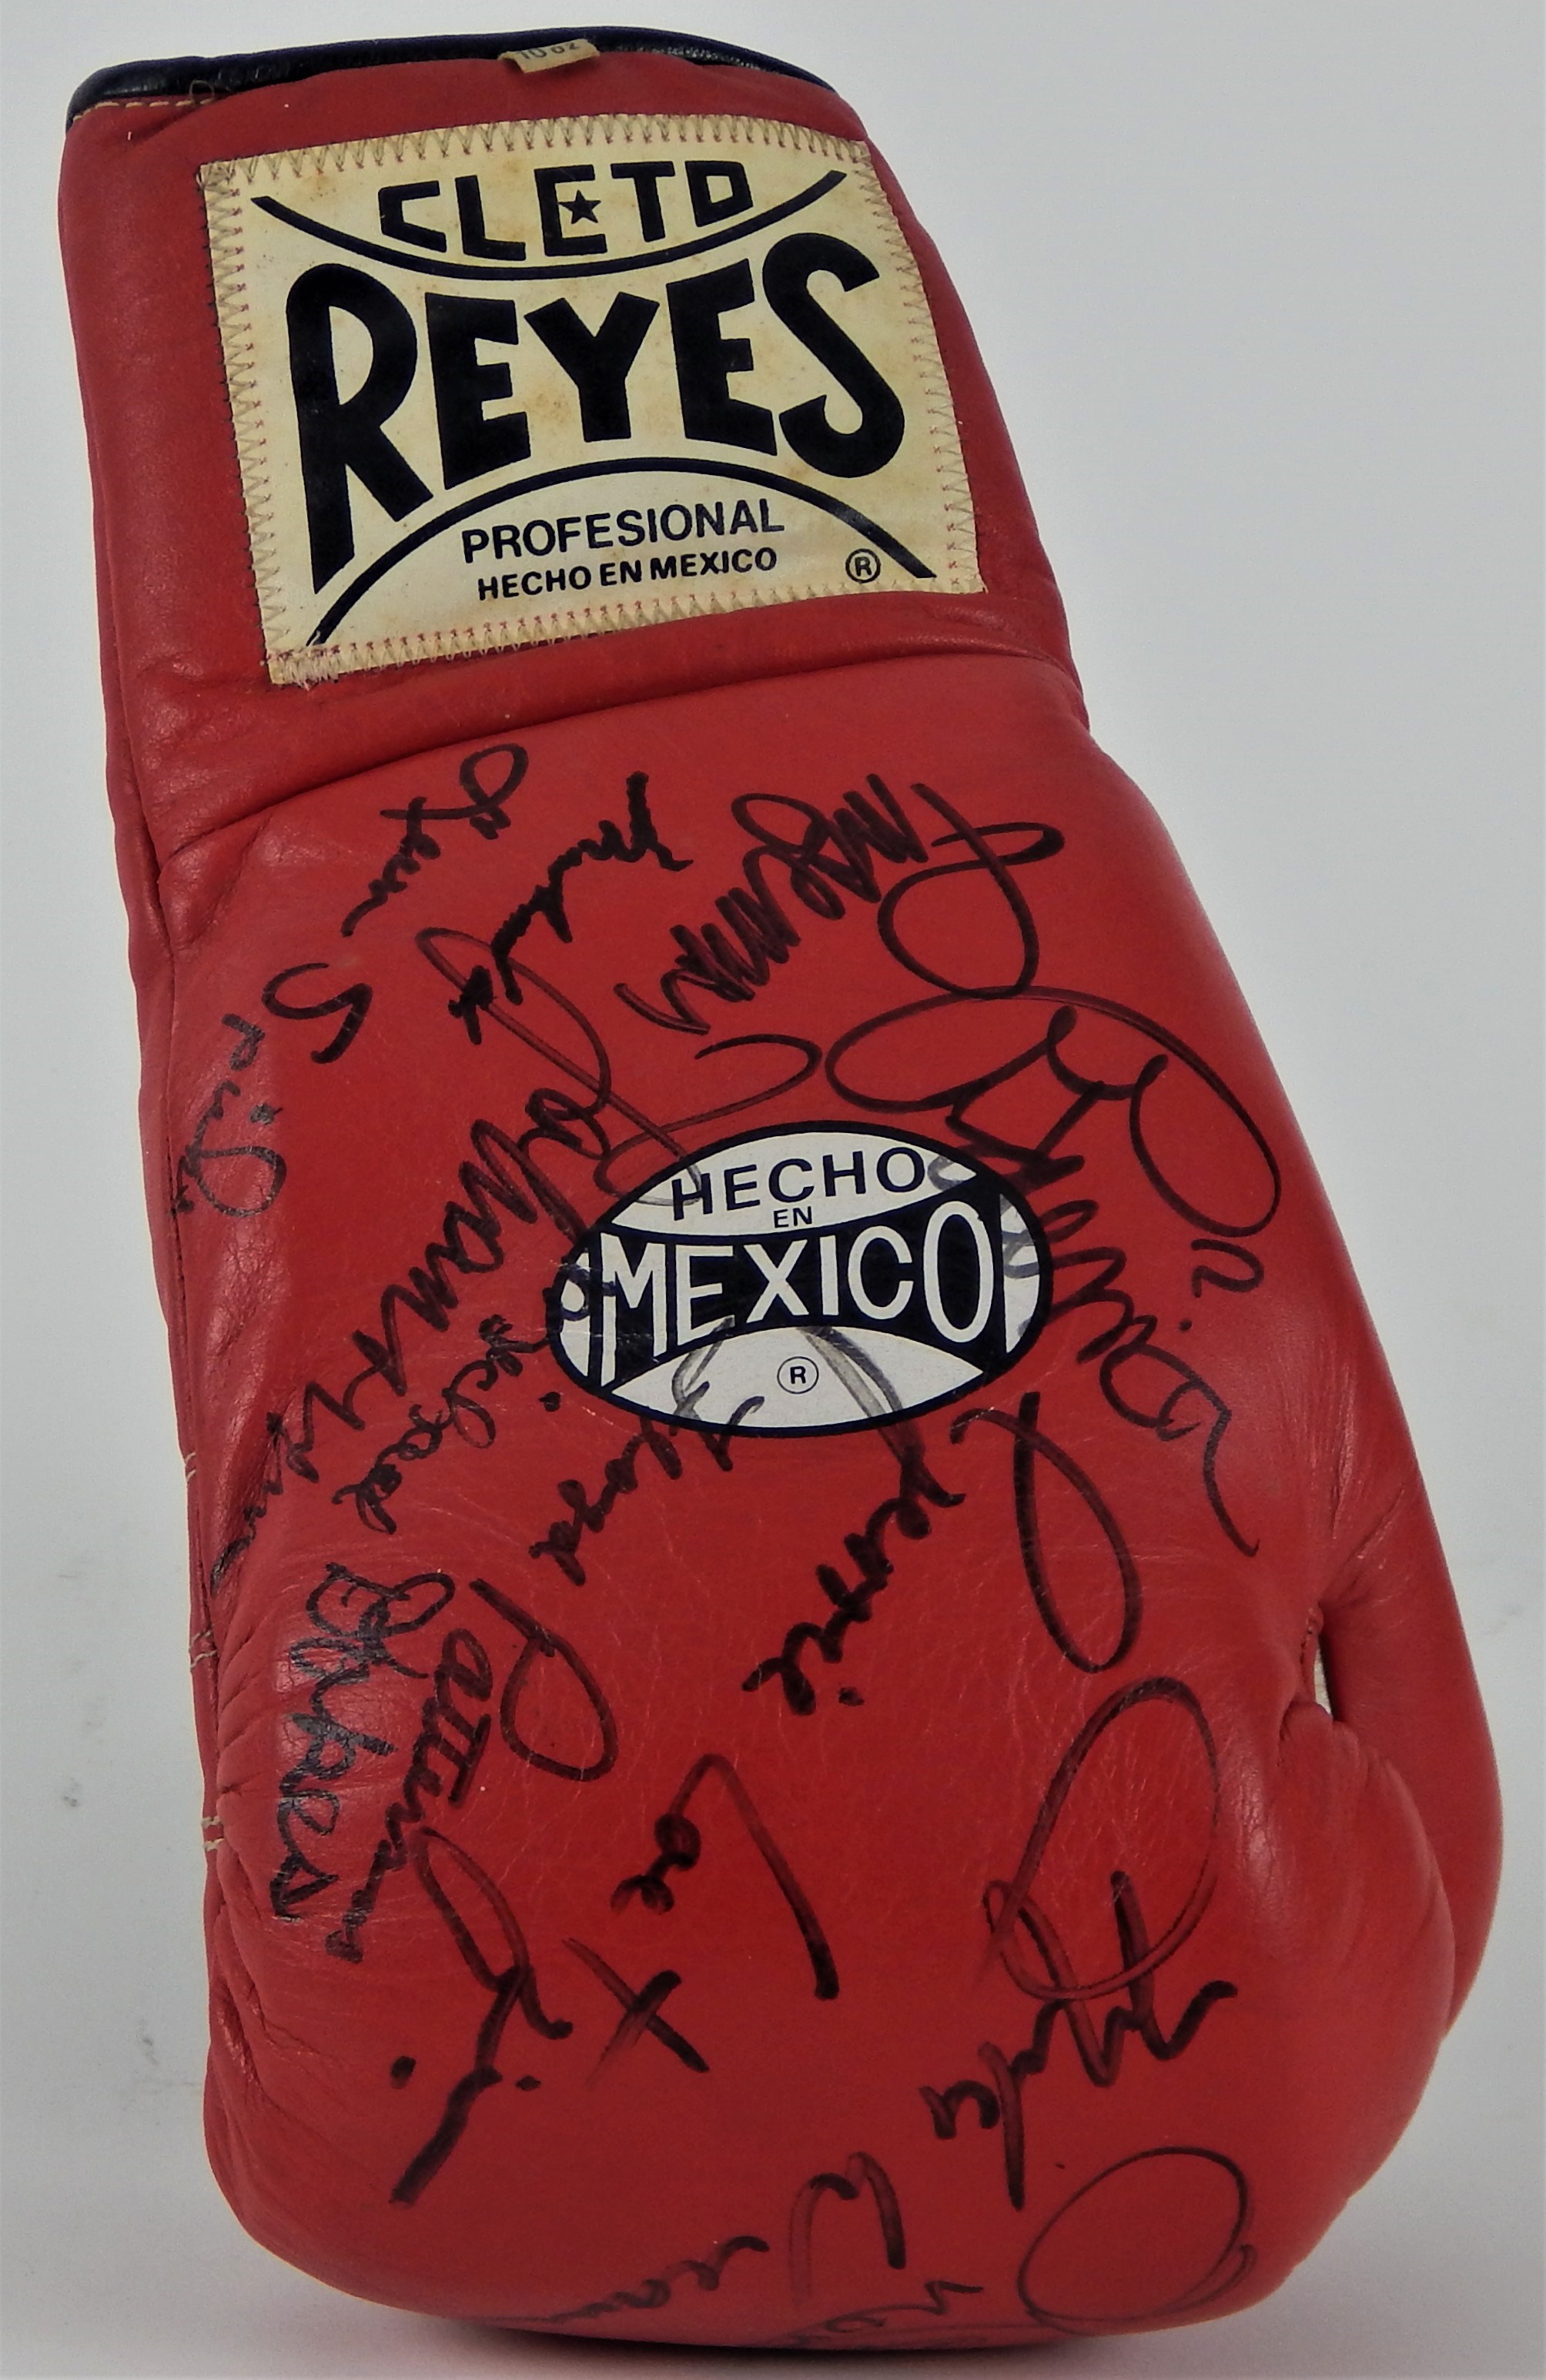 Muhammad Ali & Boxing - Boxing Hall of Fame Signed Glove with Muhammed Ali